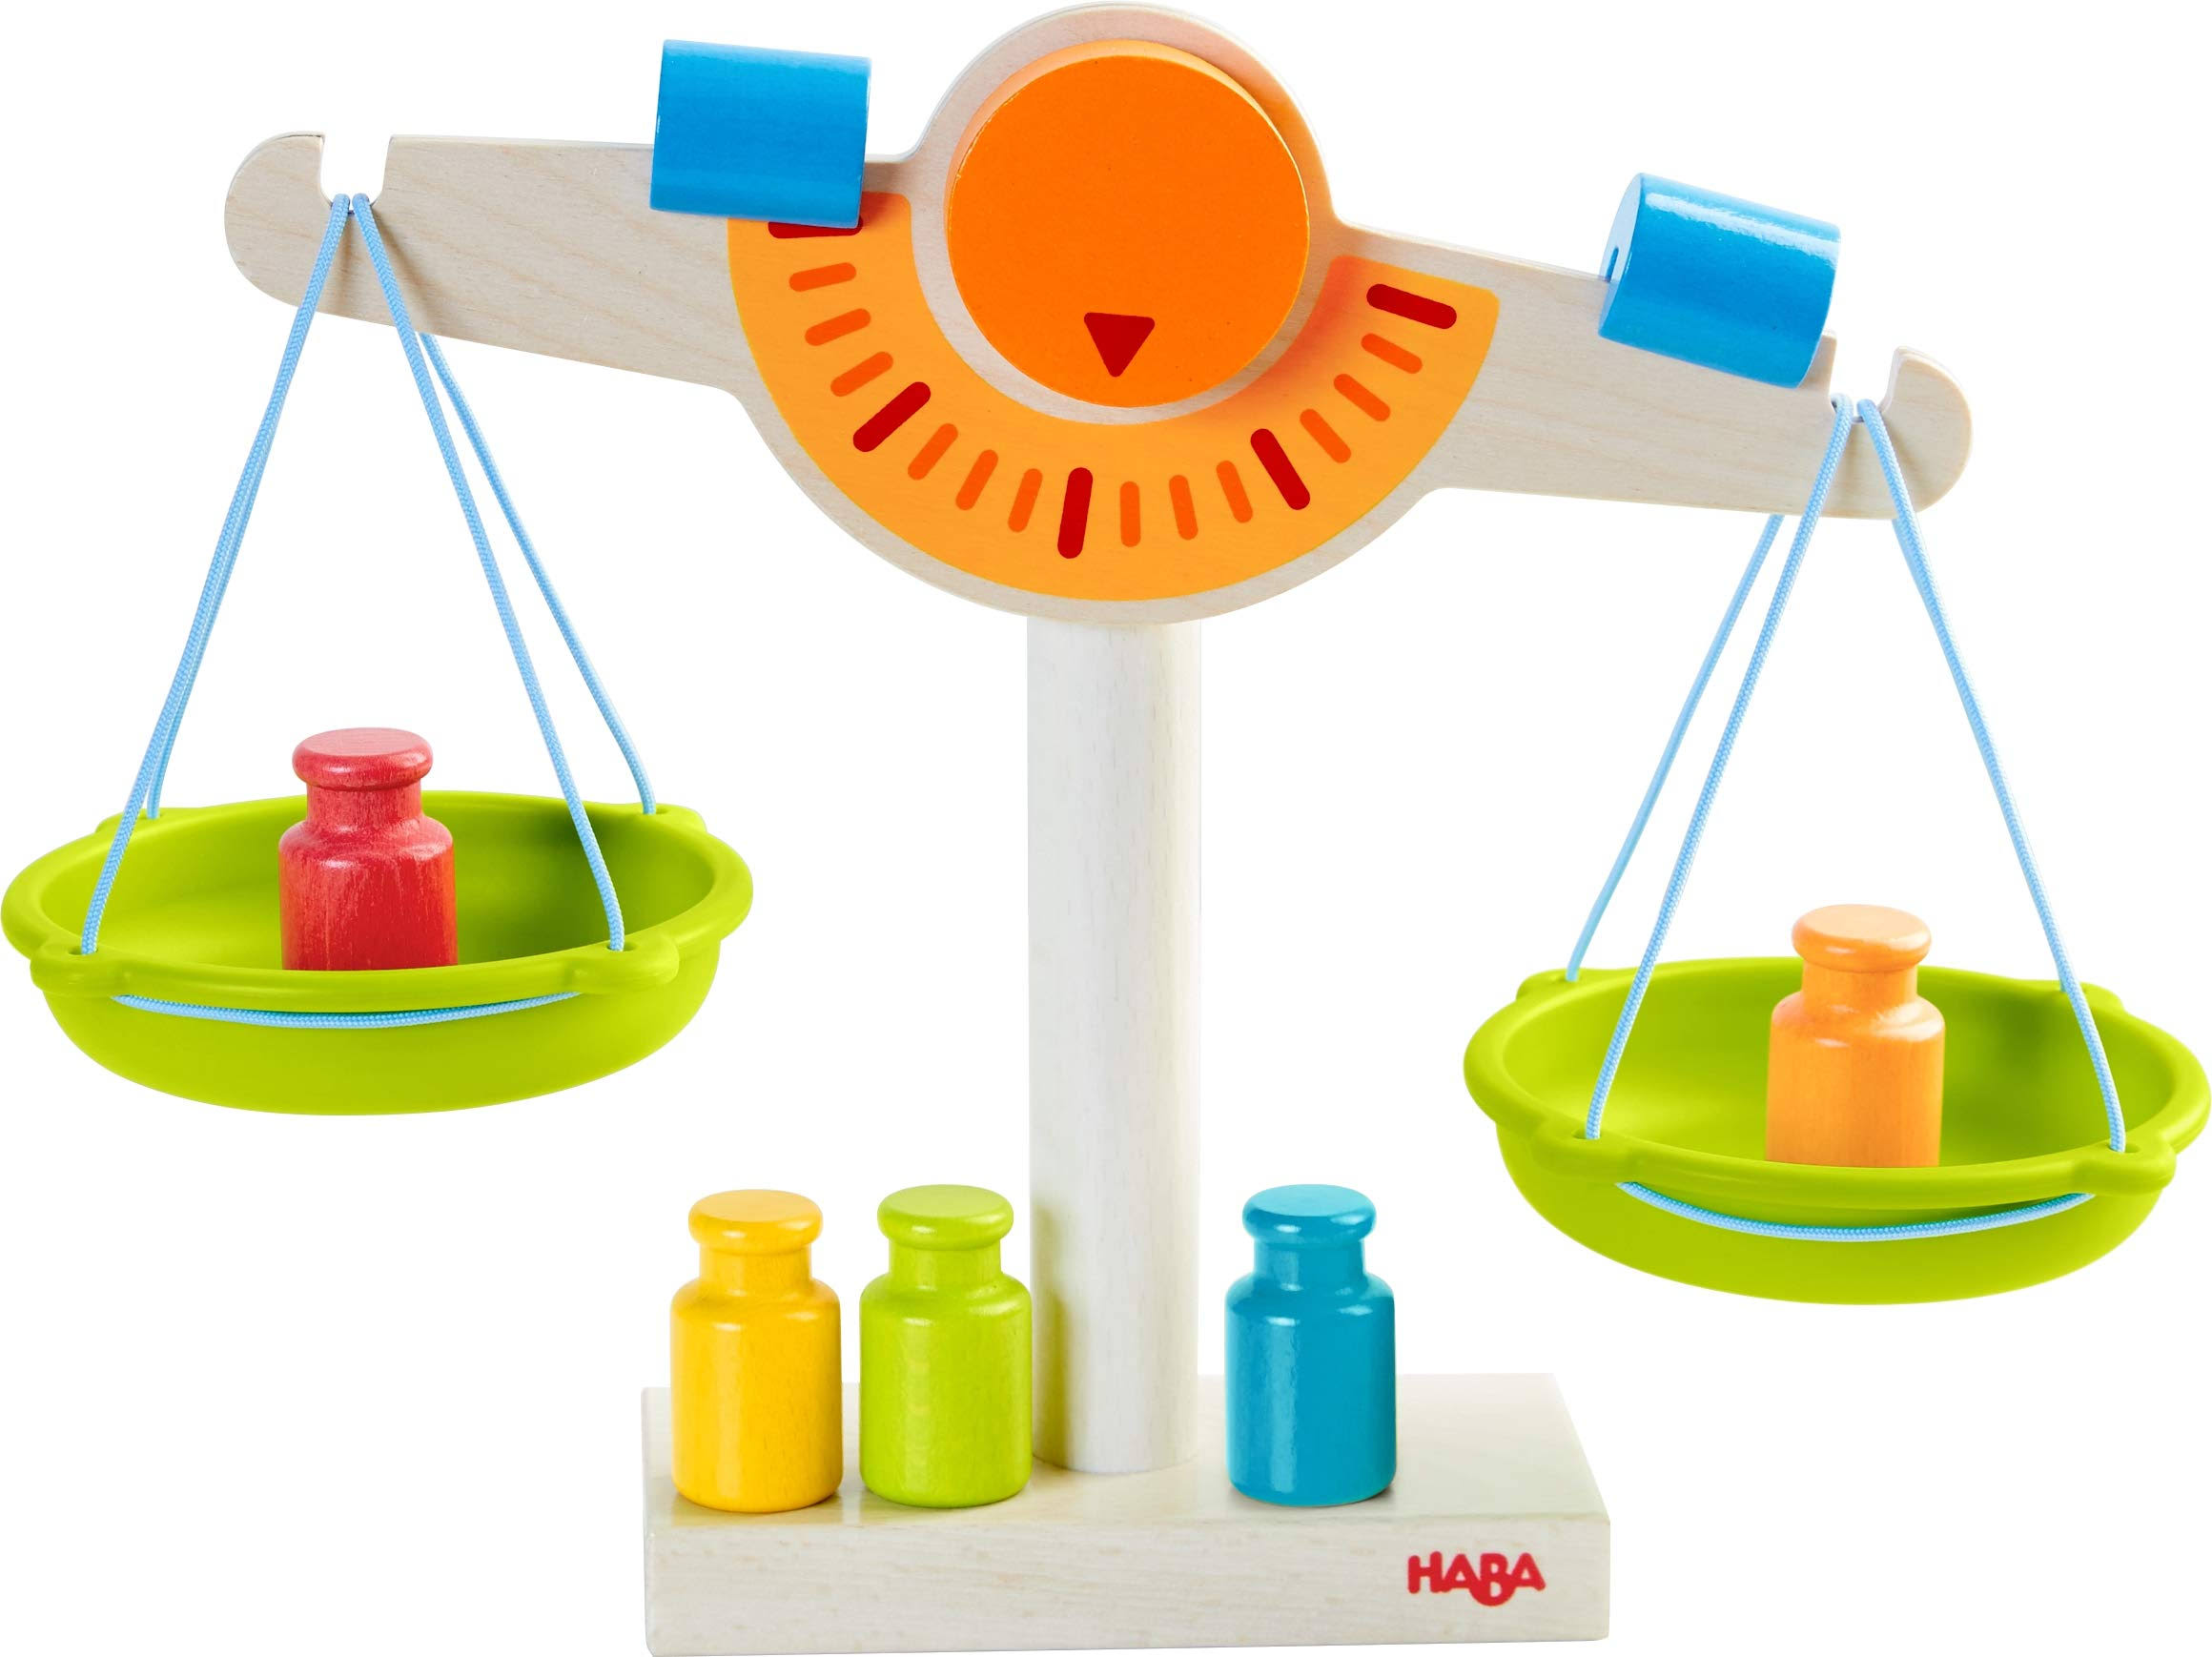 Haba Play Store Scale Wooden Balance - With Real Weights For Pretend Kitchen